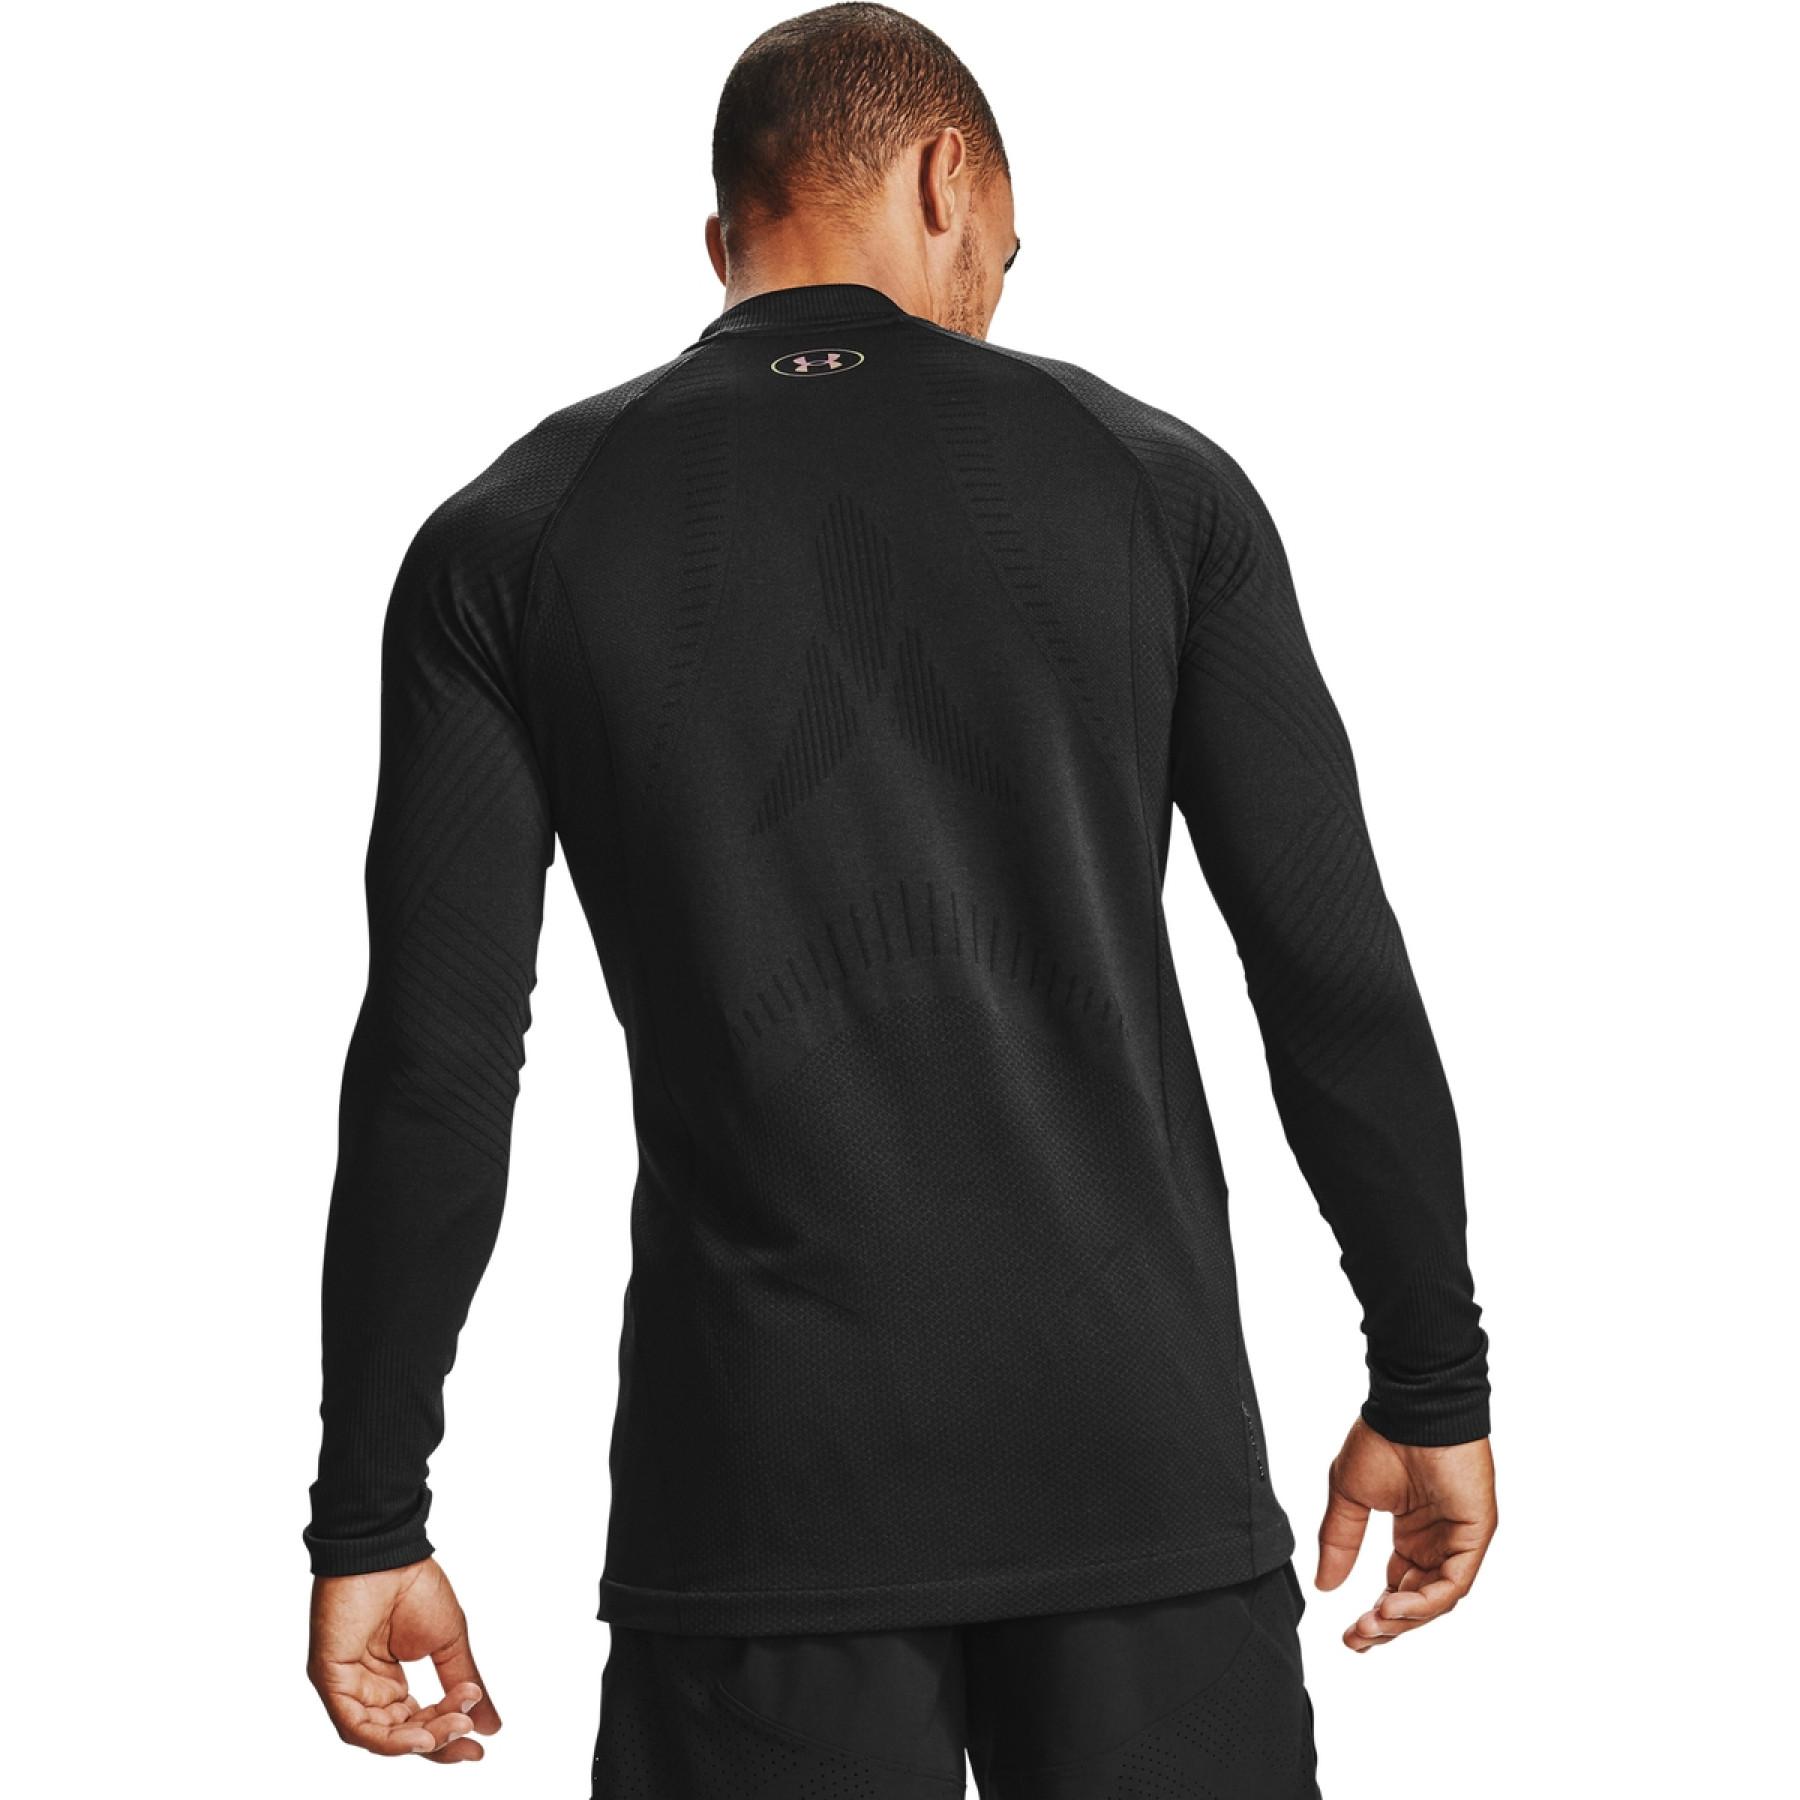 Maillot Under Armour à col montant rush ColdGear Seamless